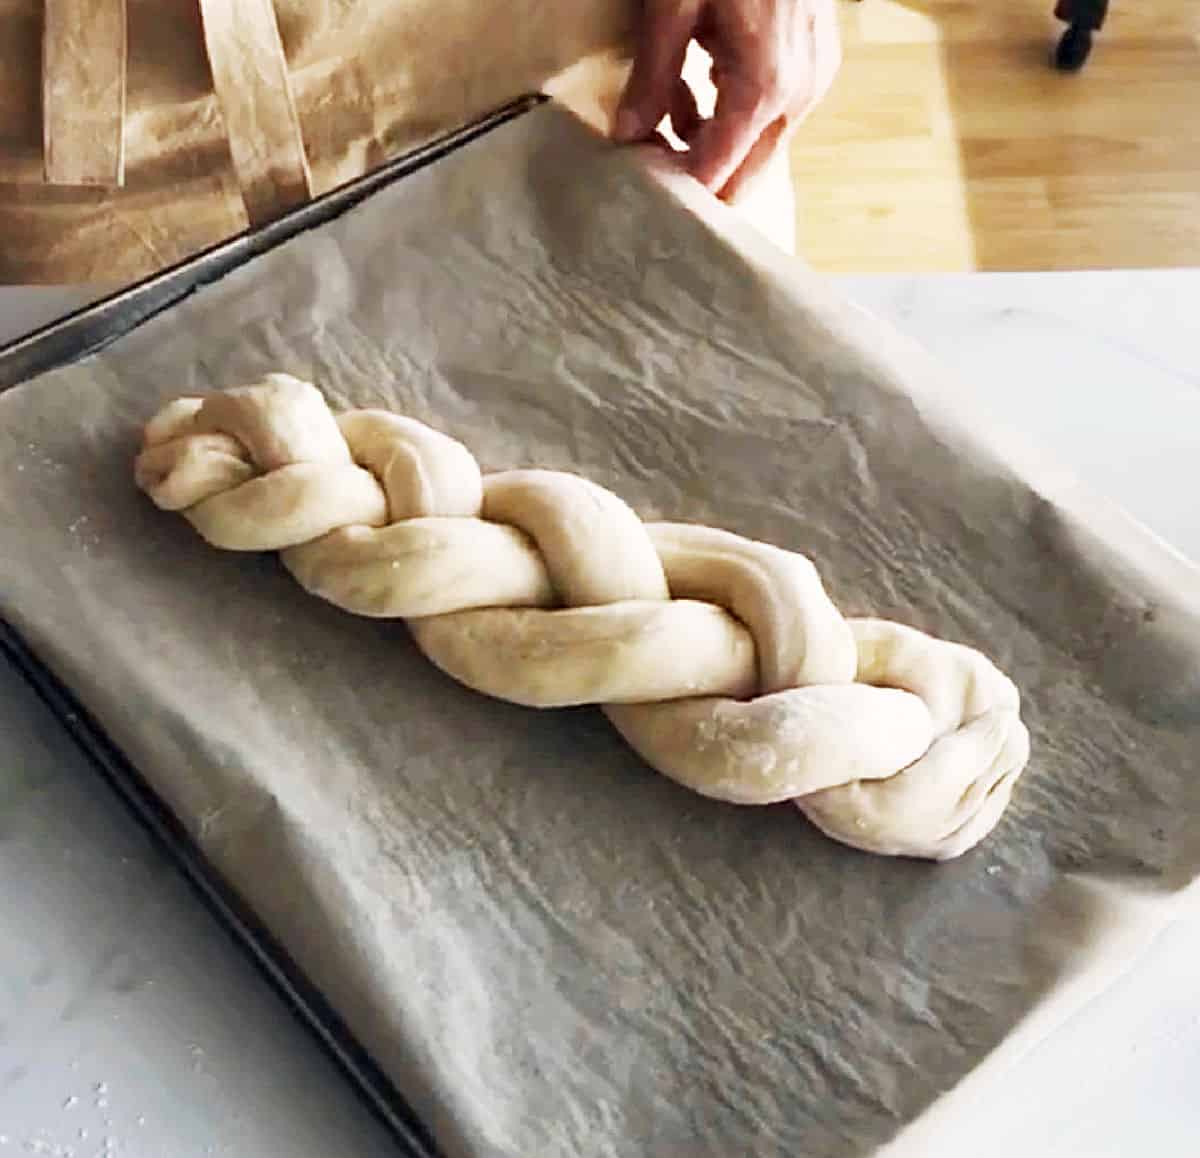 Unbaked braid of dough on a parchment lined pan.